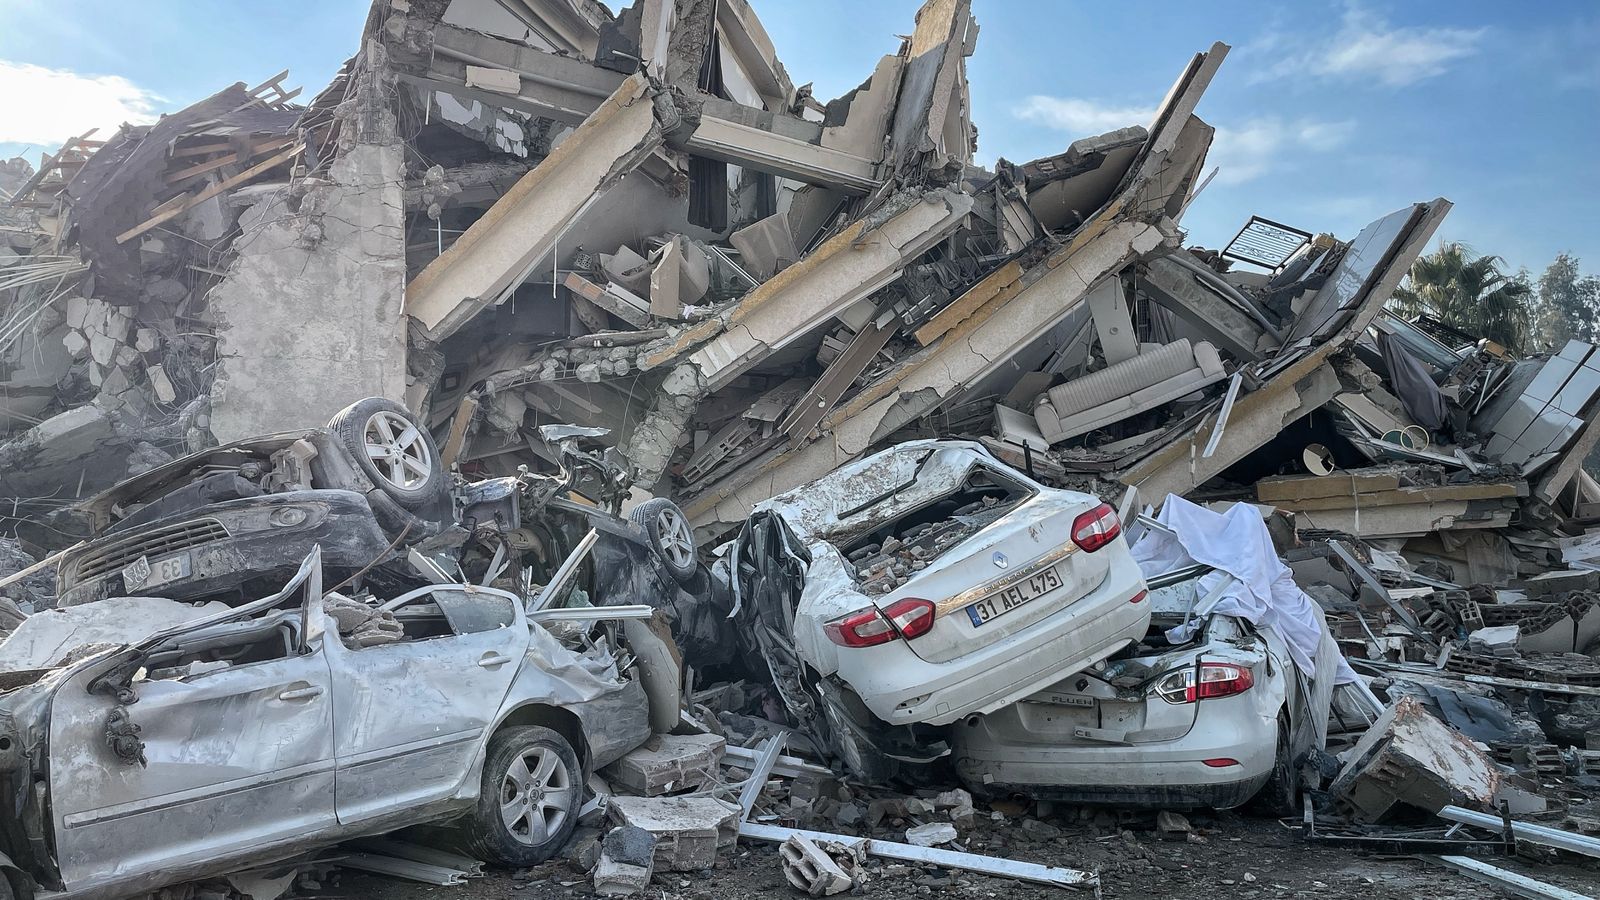 Turkey-Syria earthquake: Rescuers flood into Hatay at last - but face a scene of mind-blowing devastation